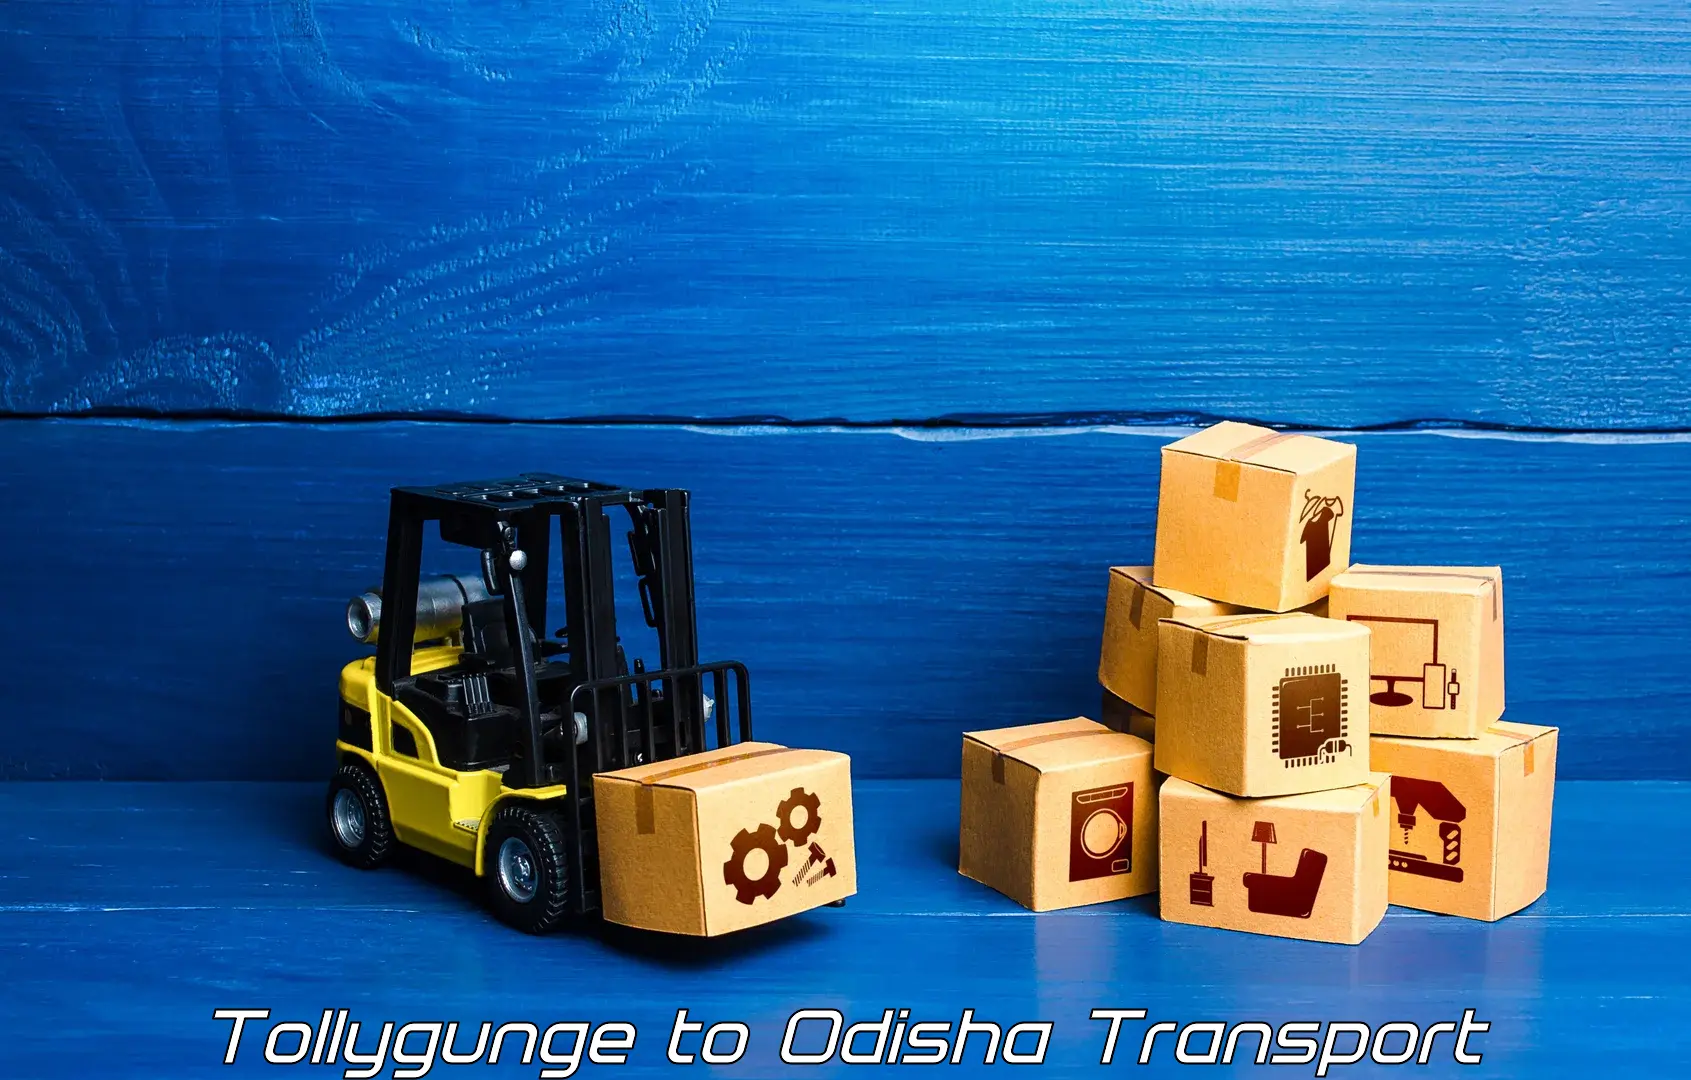 Commercial transport service Tollygunge to Baleswar